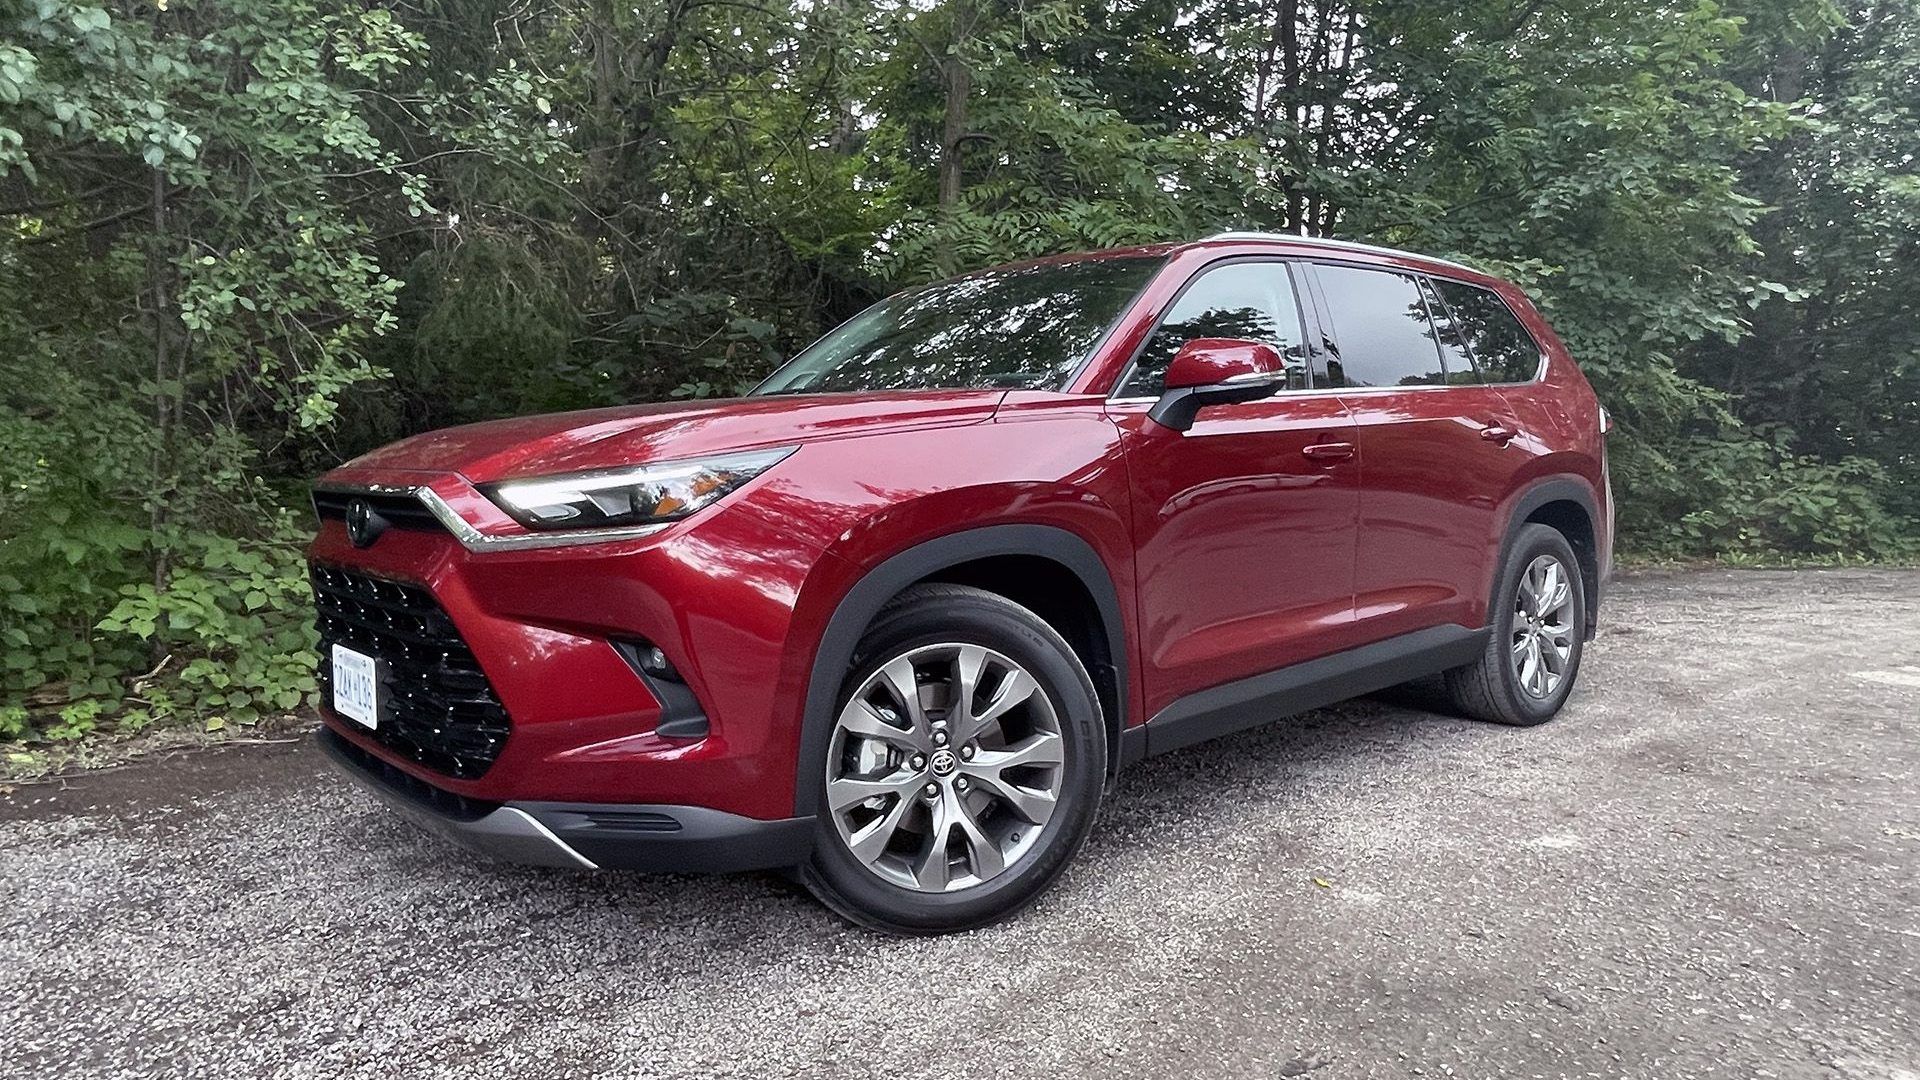 2023 Toyota Highlander Turbo First Drive Review: The Family Ride